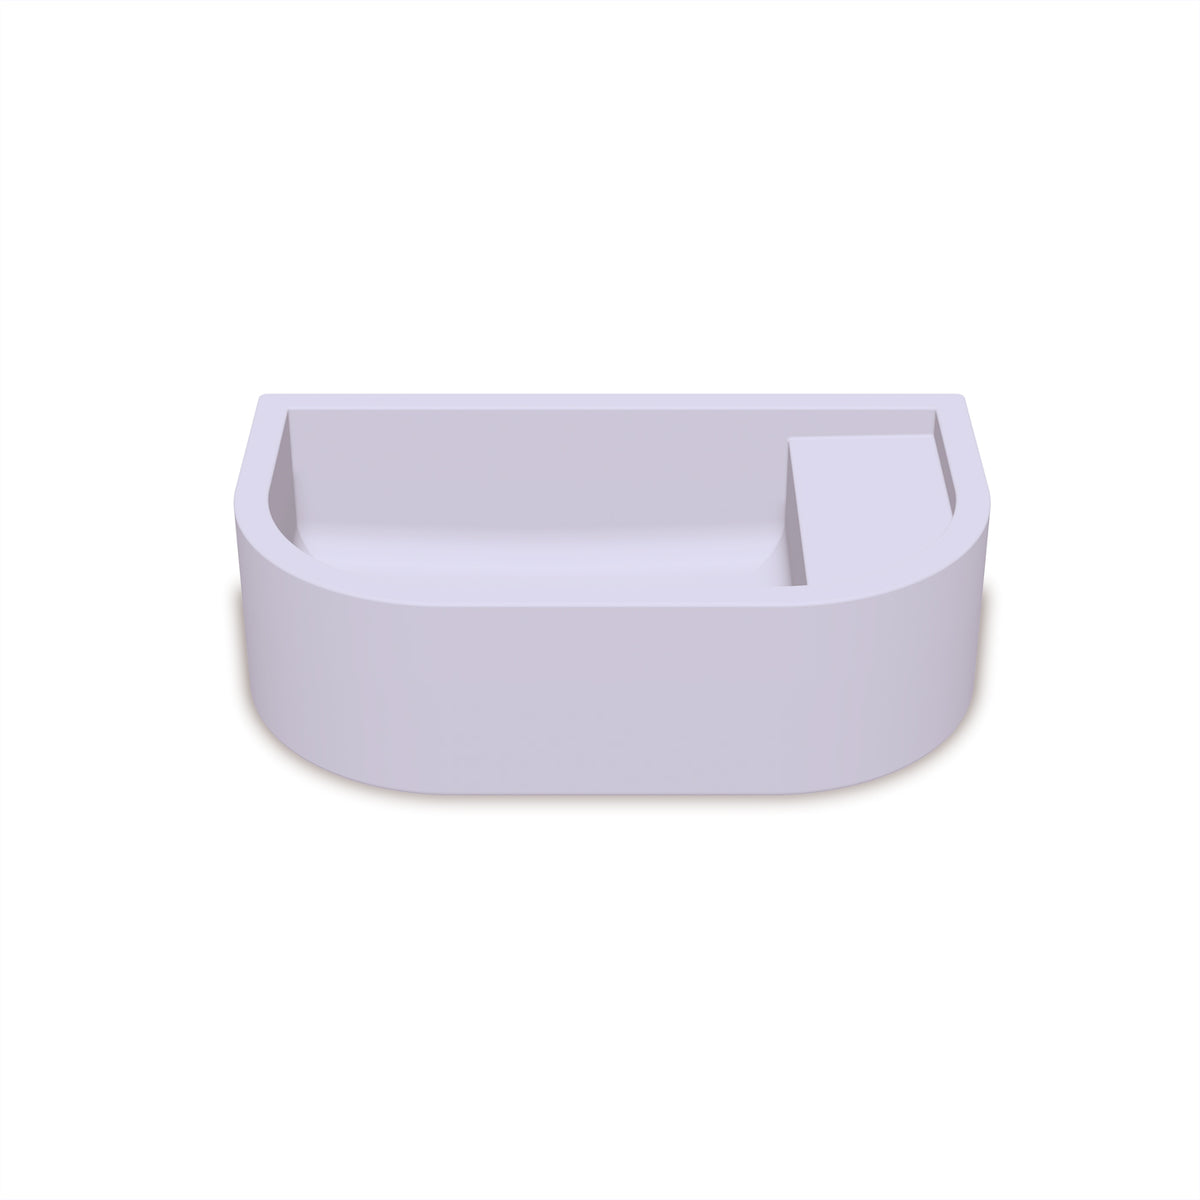 Loop 01 Basin - Overflow - Surface Mount (Lilac,No Tap Hole,White)